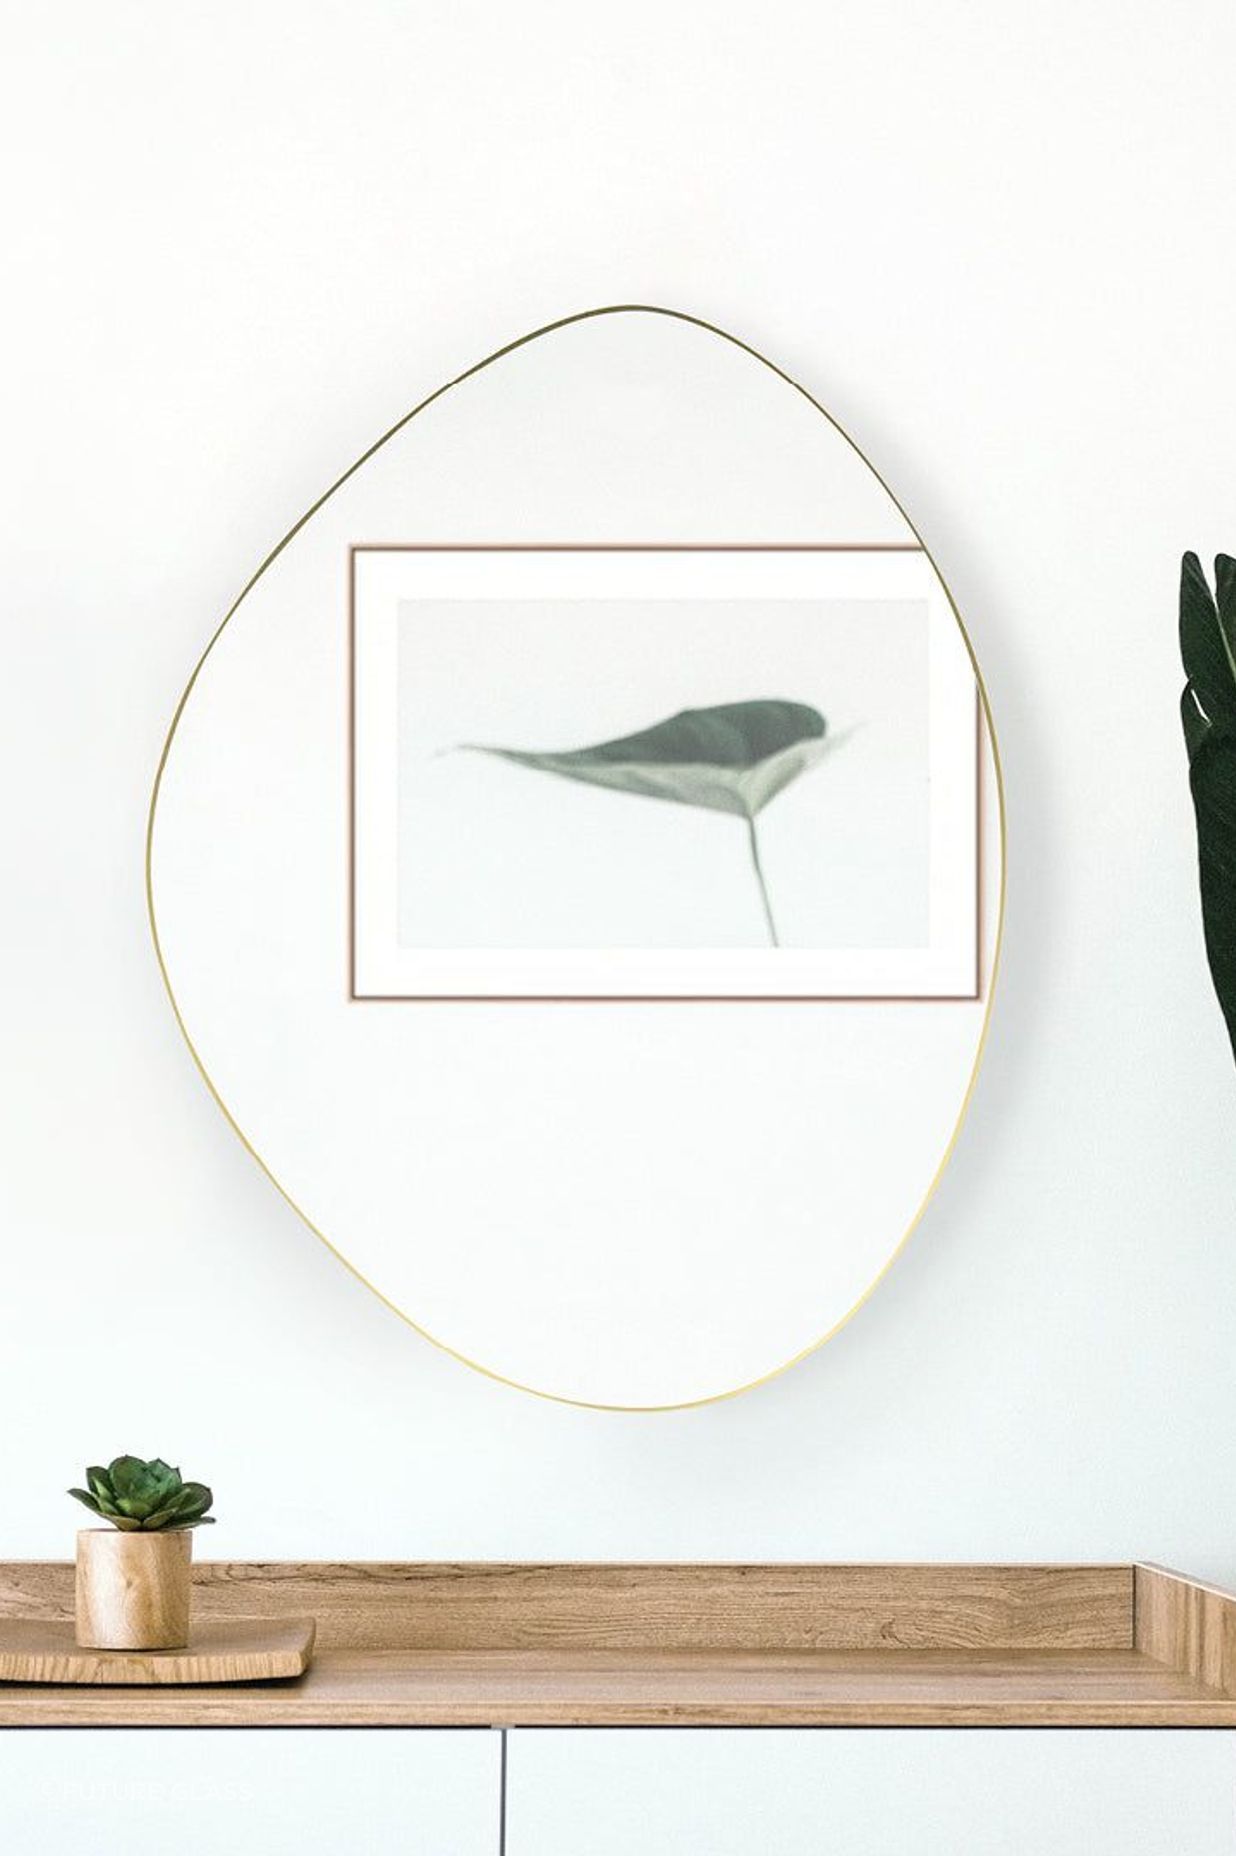 A pebble-shaped bathroom mirror that adds a touch of nature-inspired design to a bathroom. Featured product: Pebble Shape Mirror